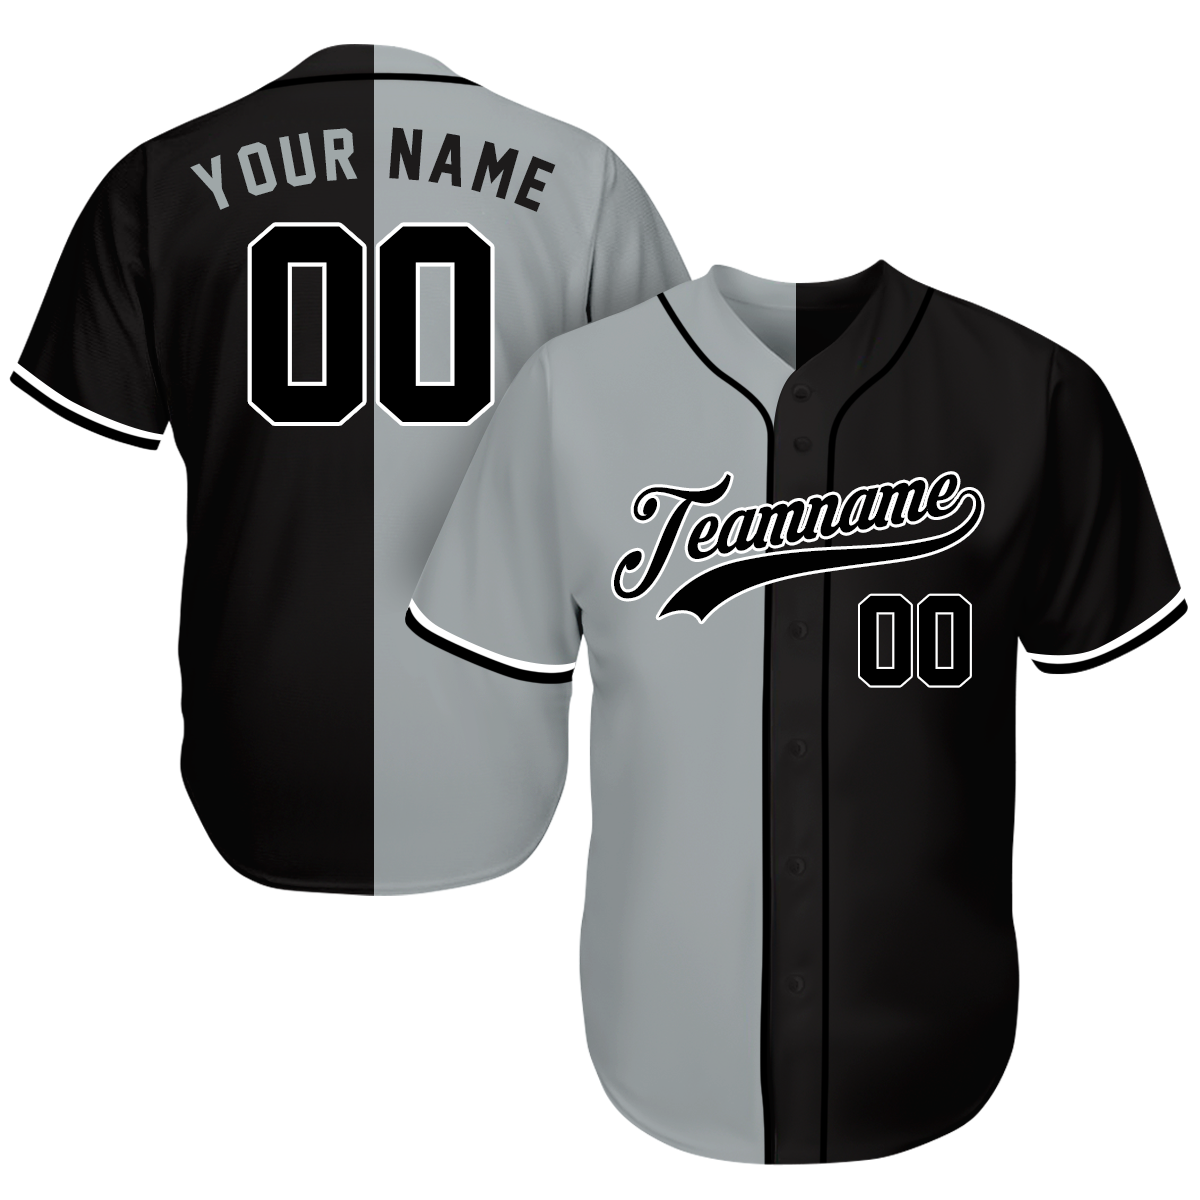 Custom Team Baseball Jerseys - Great Gifts For Baseball Fans - Split Gray Black - Personalized Baseball Father's Day Gifts